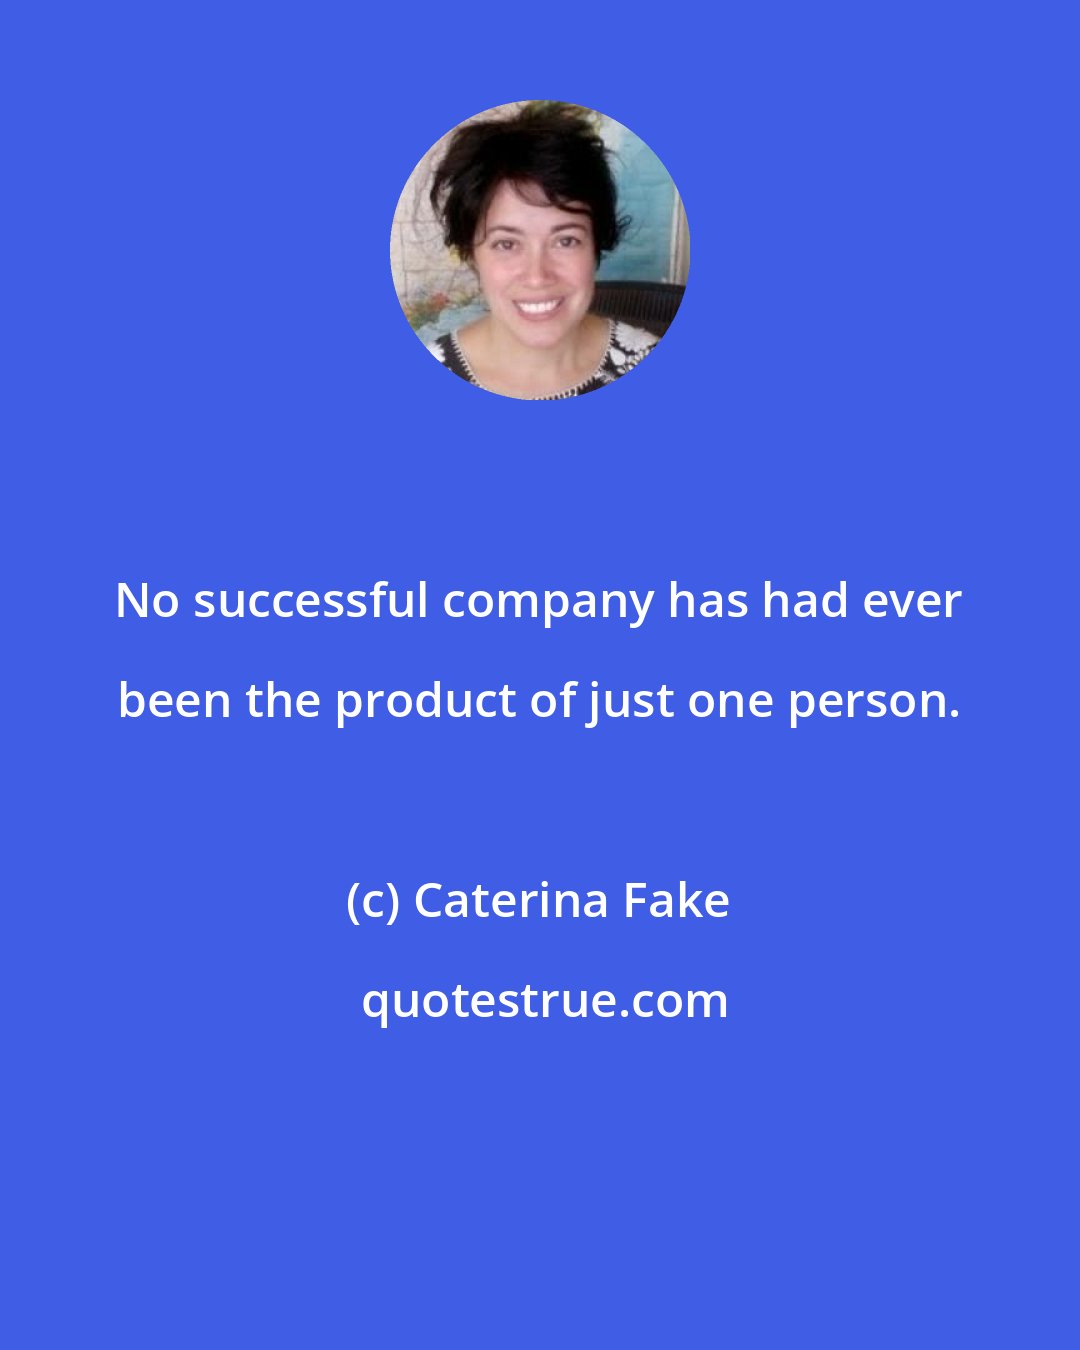 Caterina Fake: No successful company has had ever been the product of just one person.